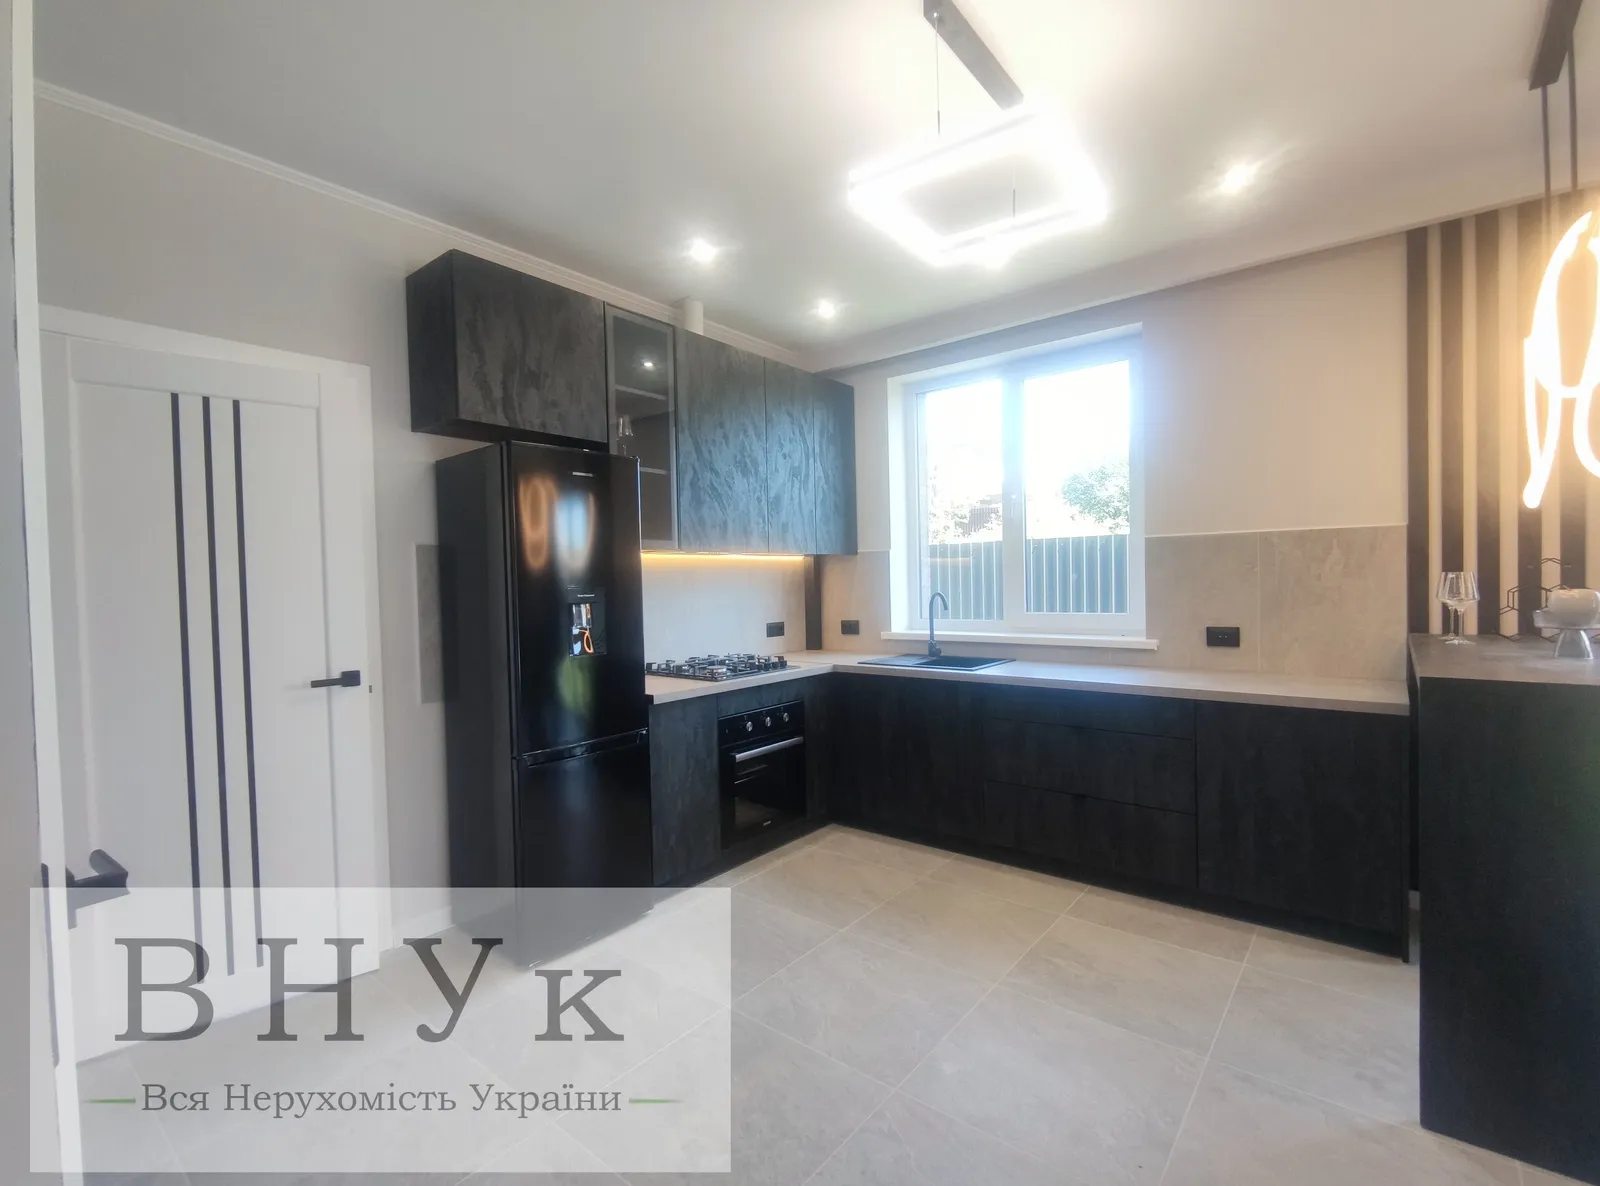 House for sale. 94 m², 1 floor. Sonyachna , Ternopil. 